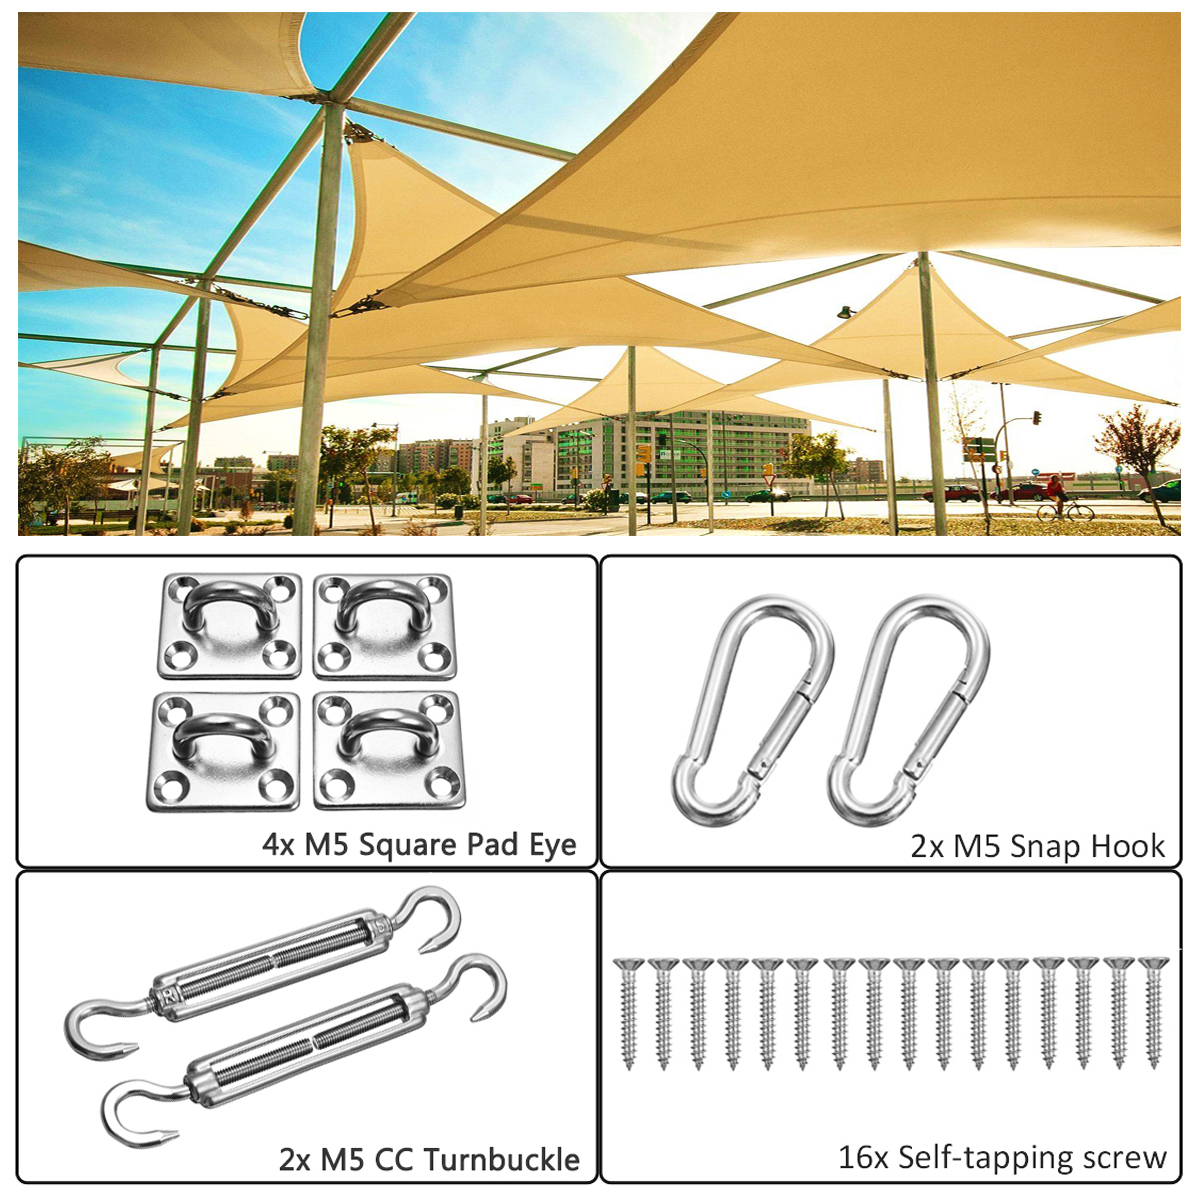 24Pcs-Sun-Shade-Sail-Accessories-for-Rectangle-or-Square-Shade-Sail-Replacement-Fitting-Tools-Kit-1392248-1